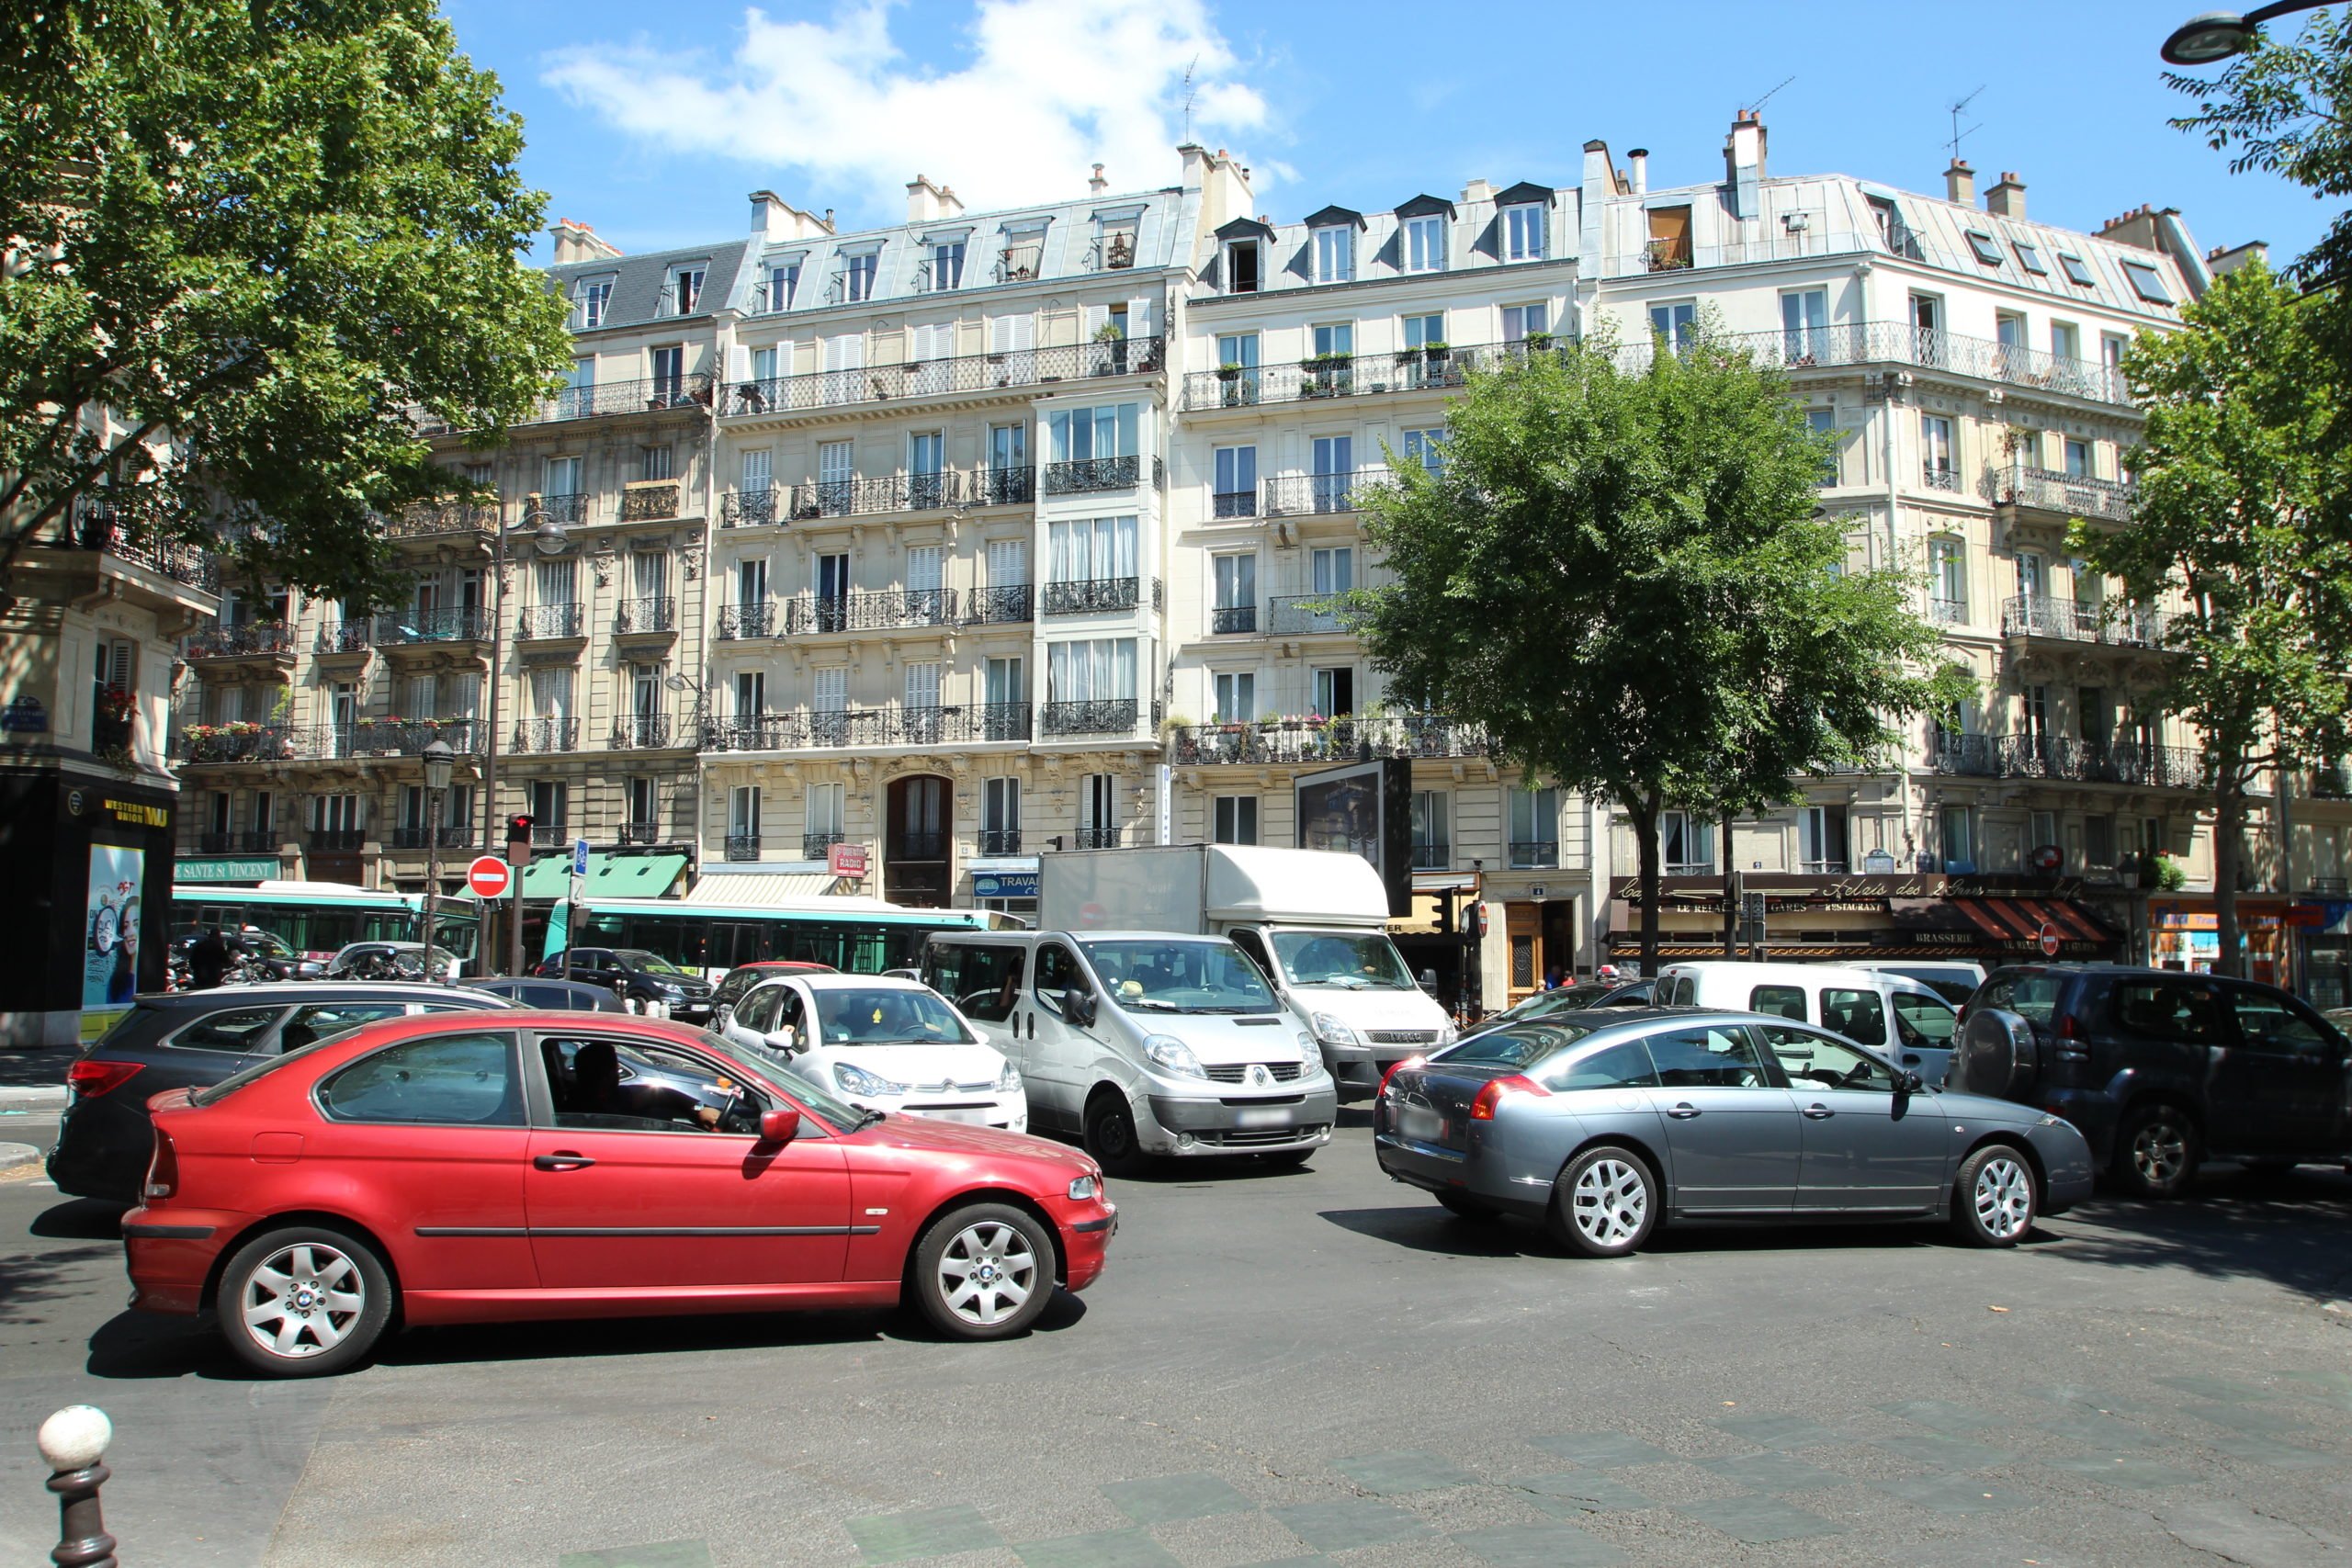 More than half the space in some European cities is devoted to cars, which are parked 90% of the time, says Dr Chaix. Image credit - Wikimedia/Lionel Allorge